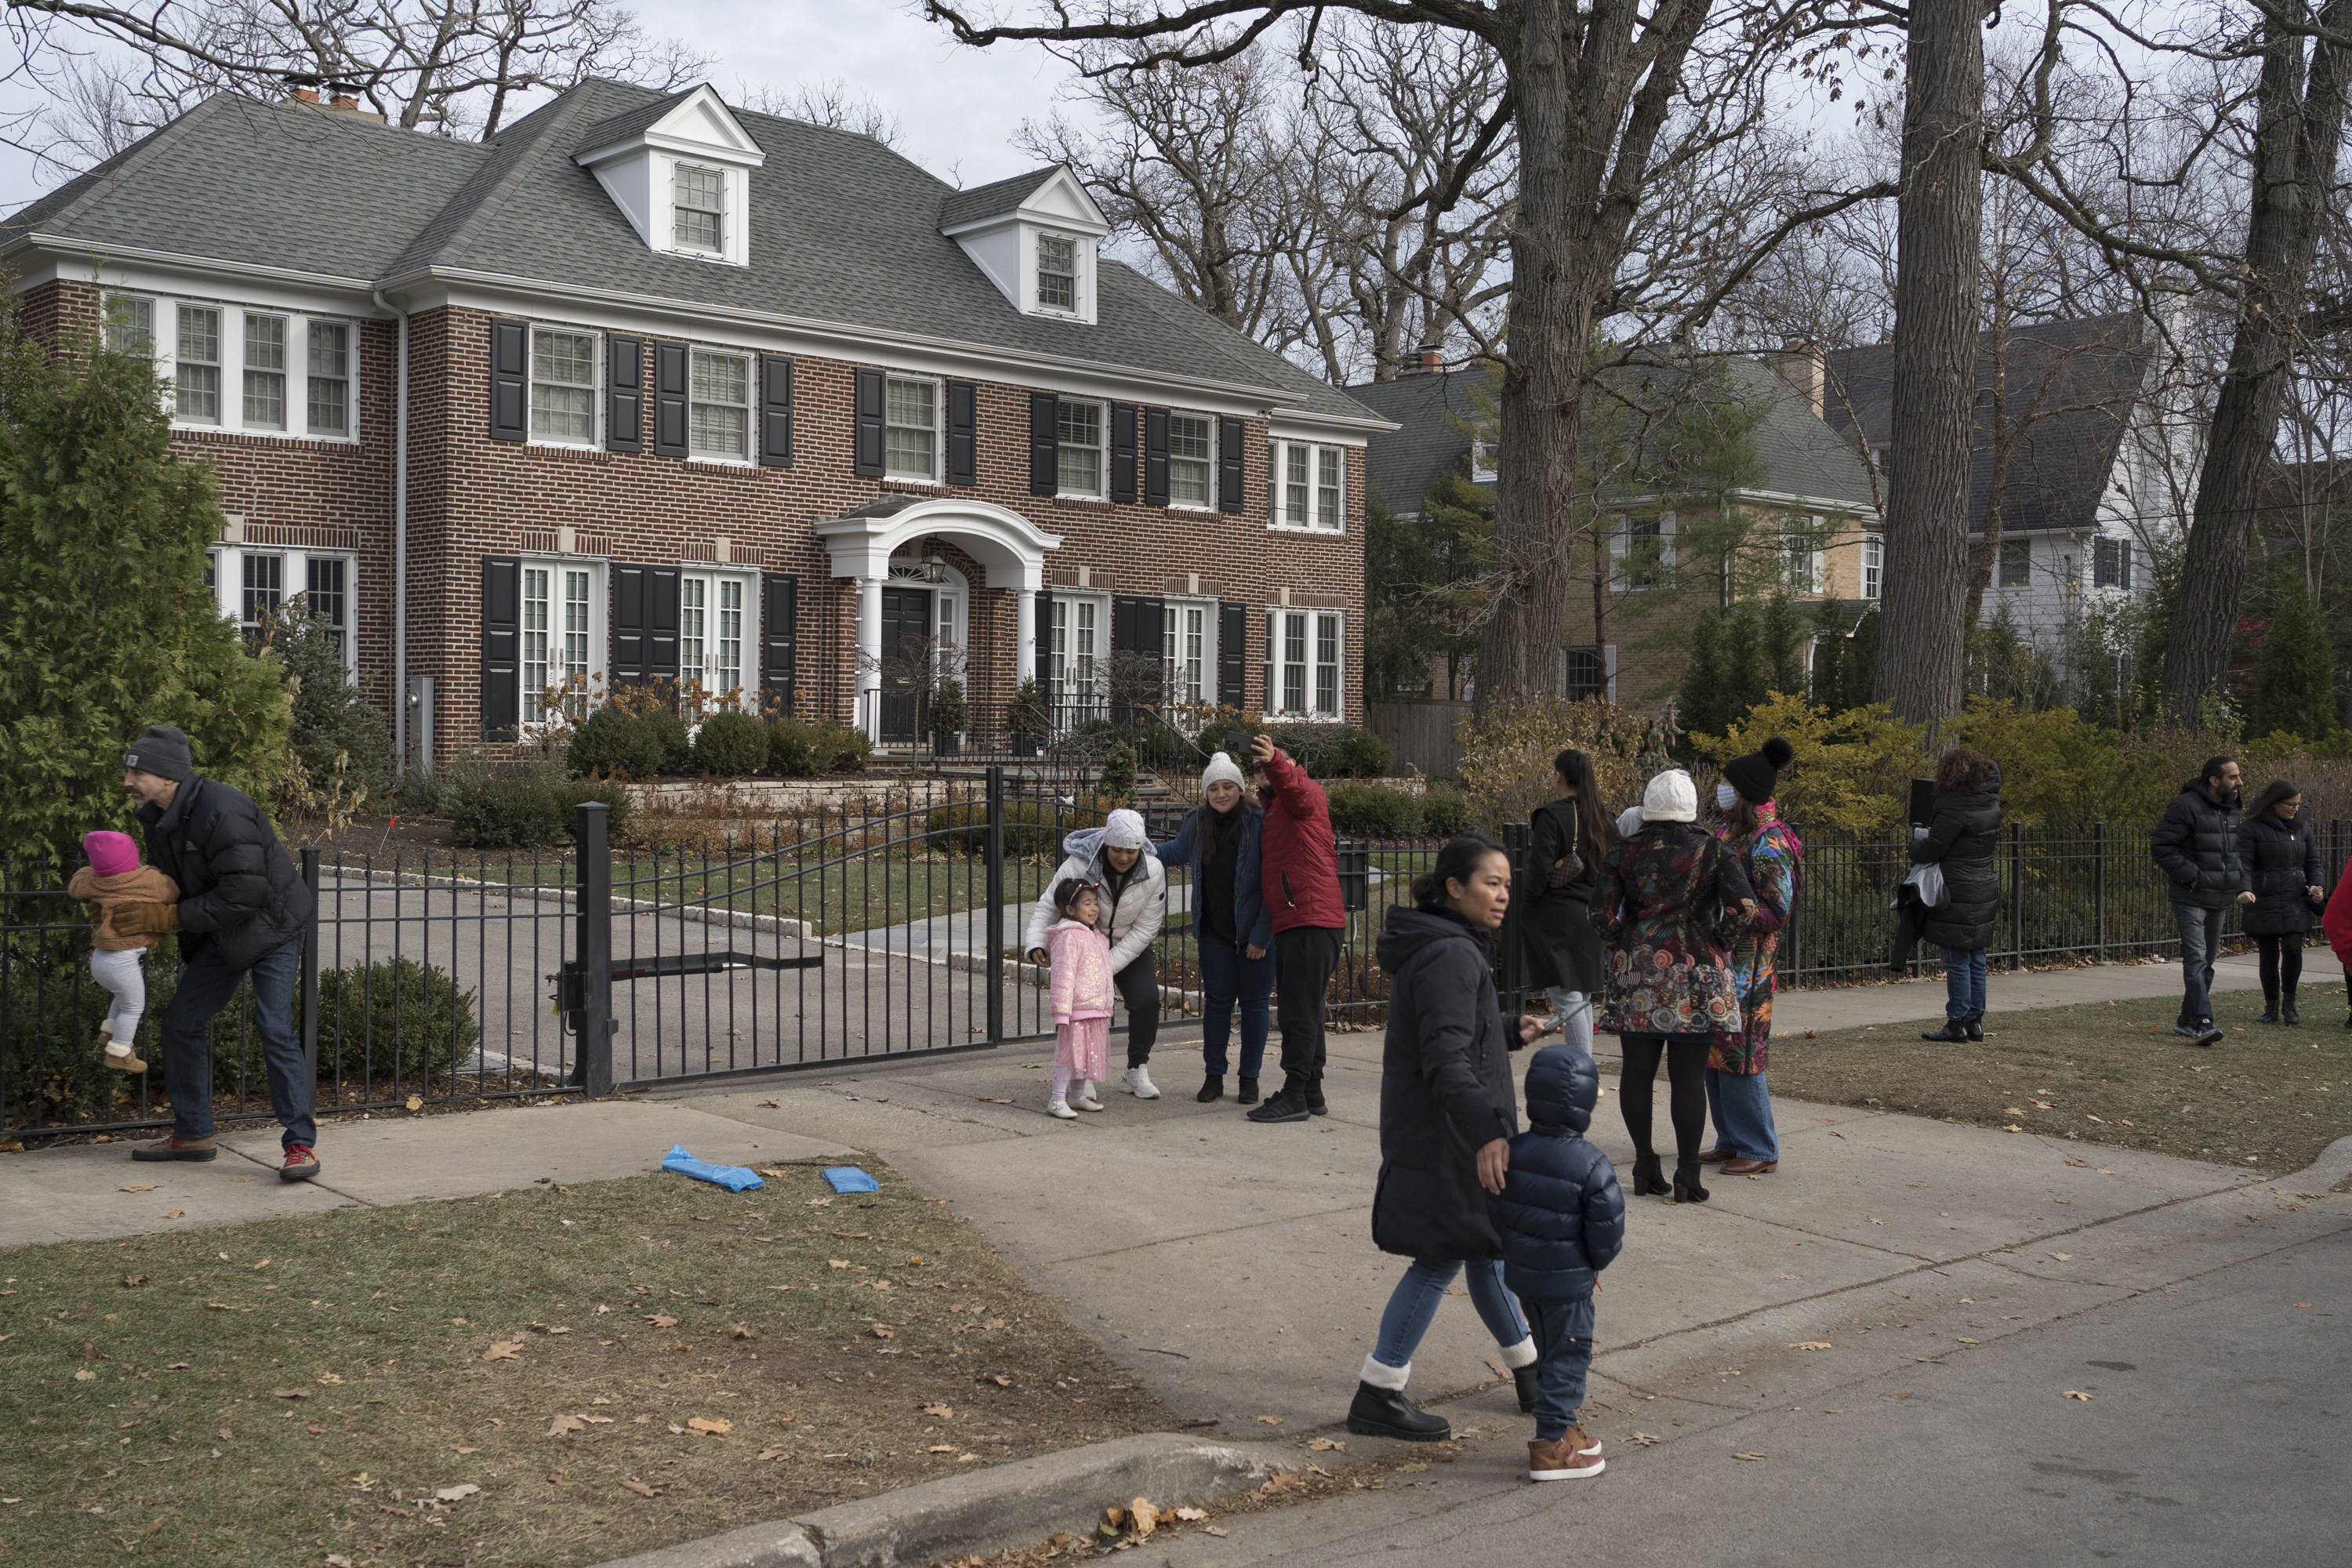 People visit the house featured in the movie &quot;Home Alone&quot; in Winnetka, Illinois